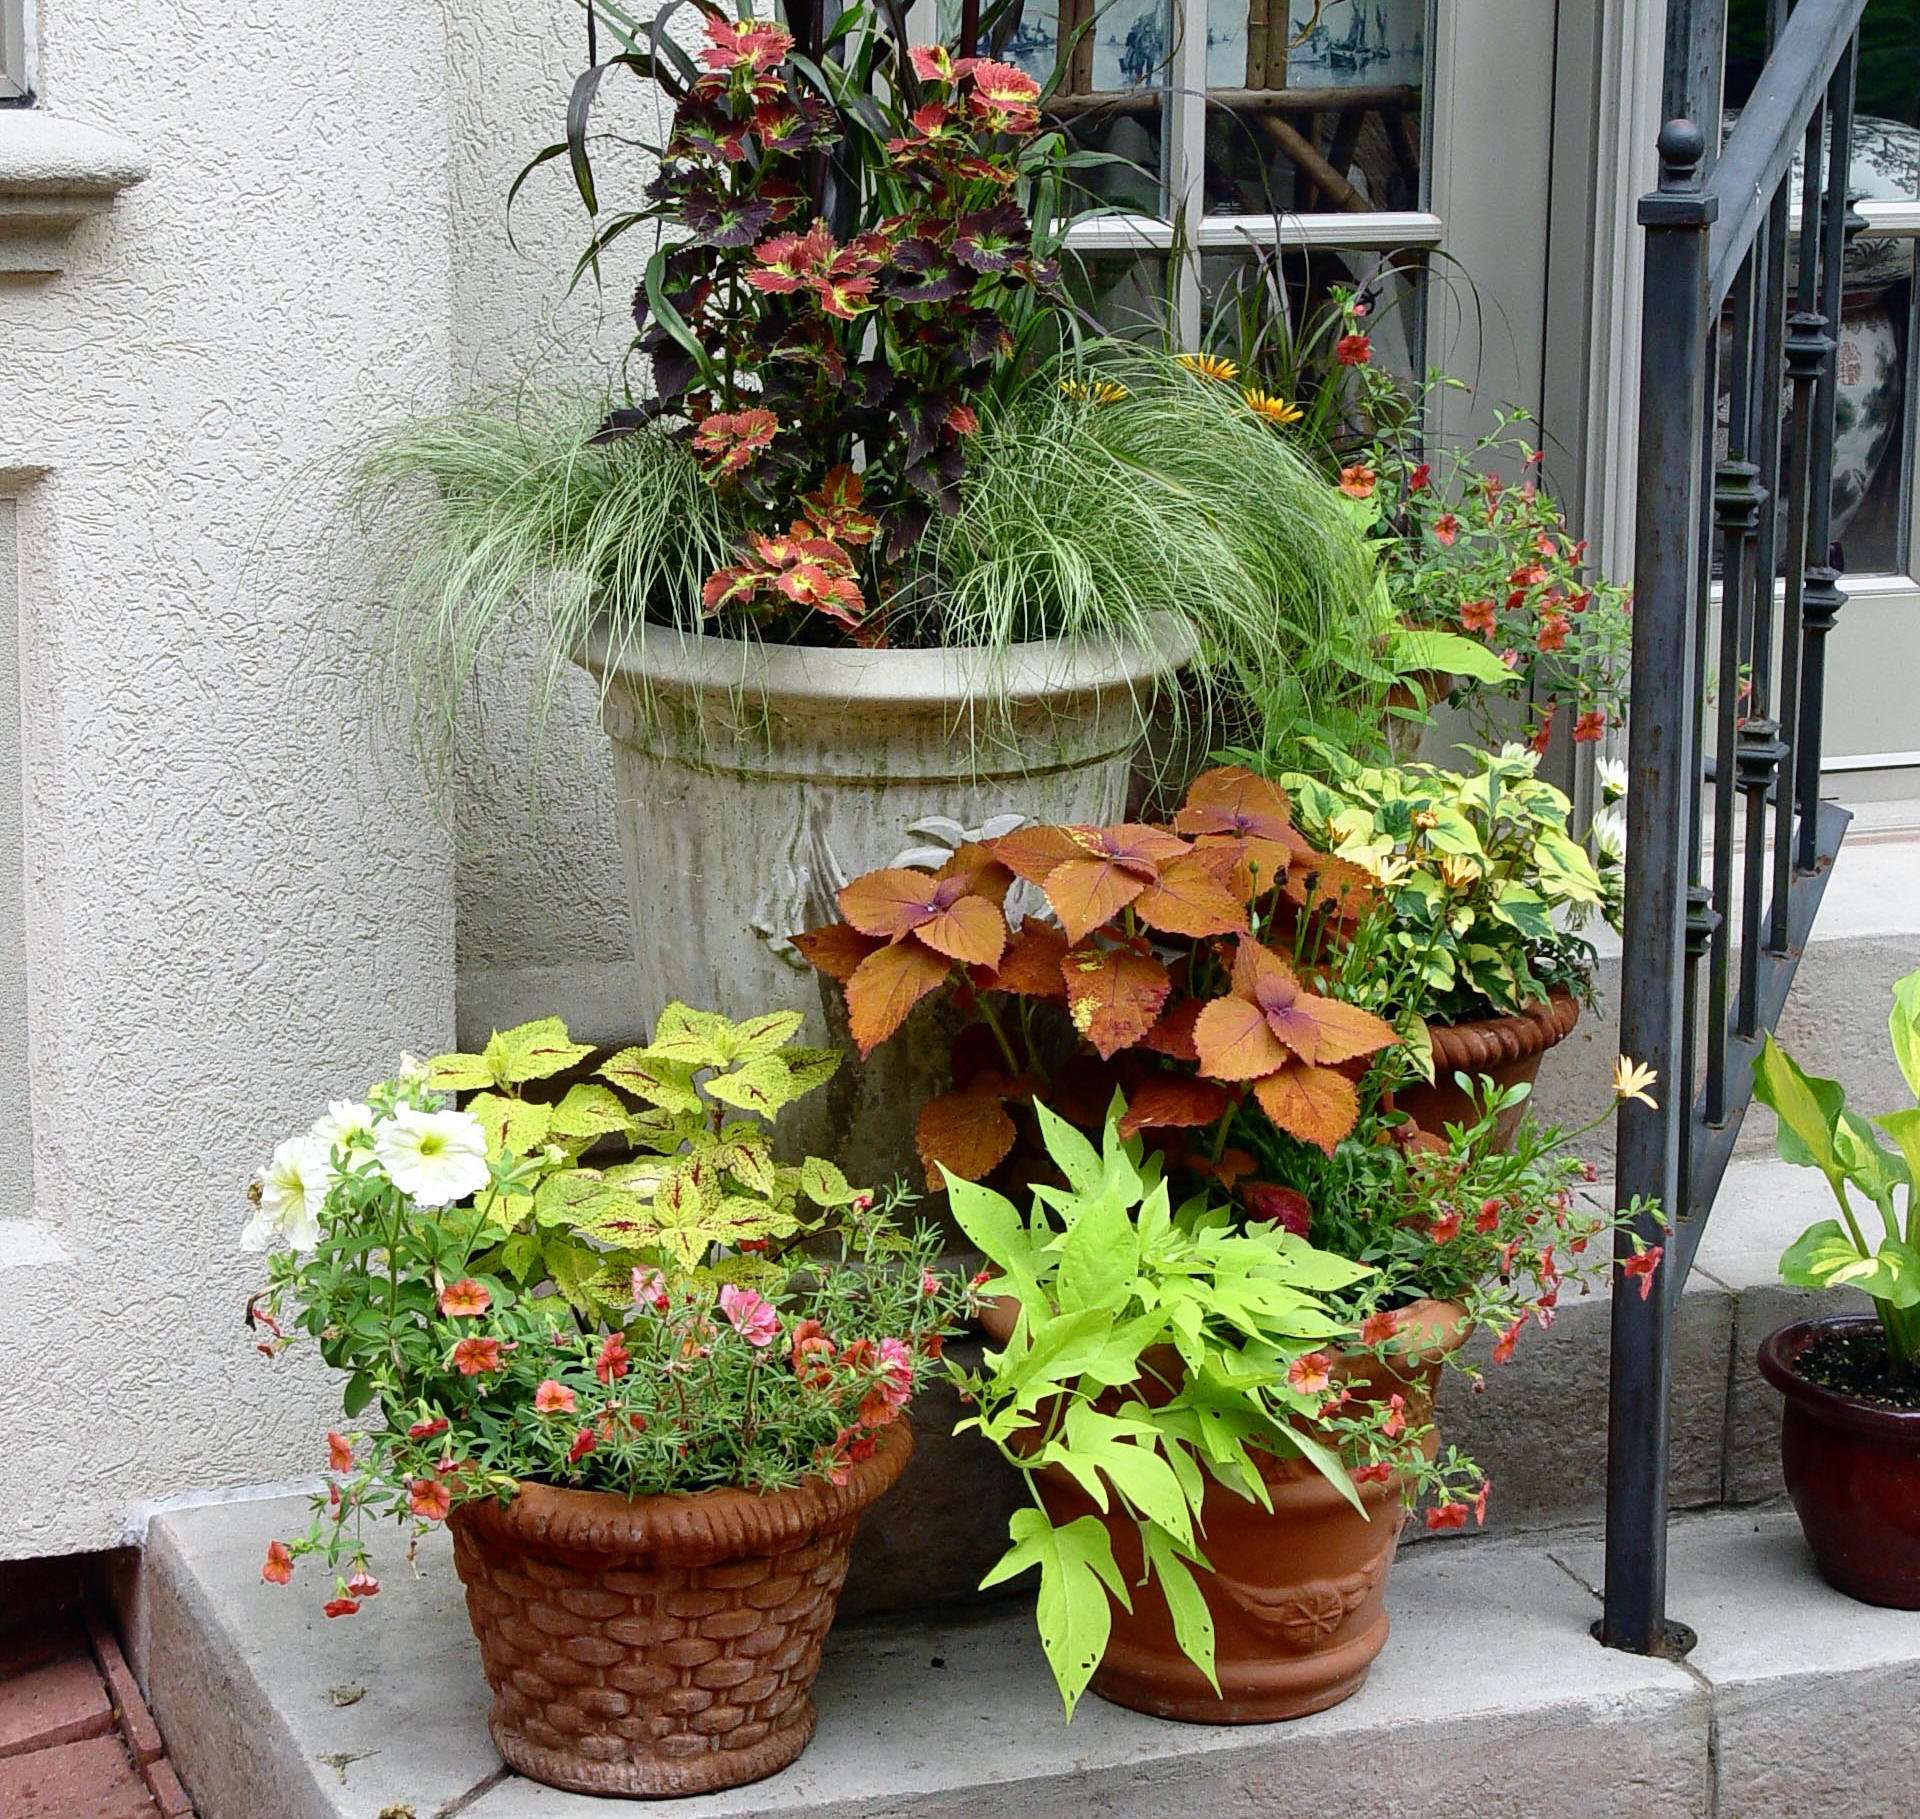 How To Arrange Potted Plants On A Patio, How To Arrange Plants On Patio